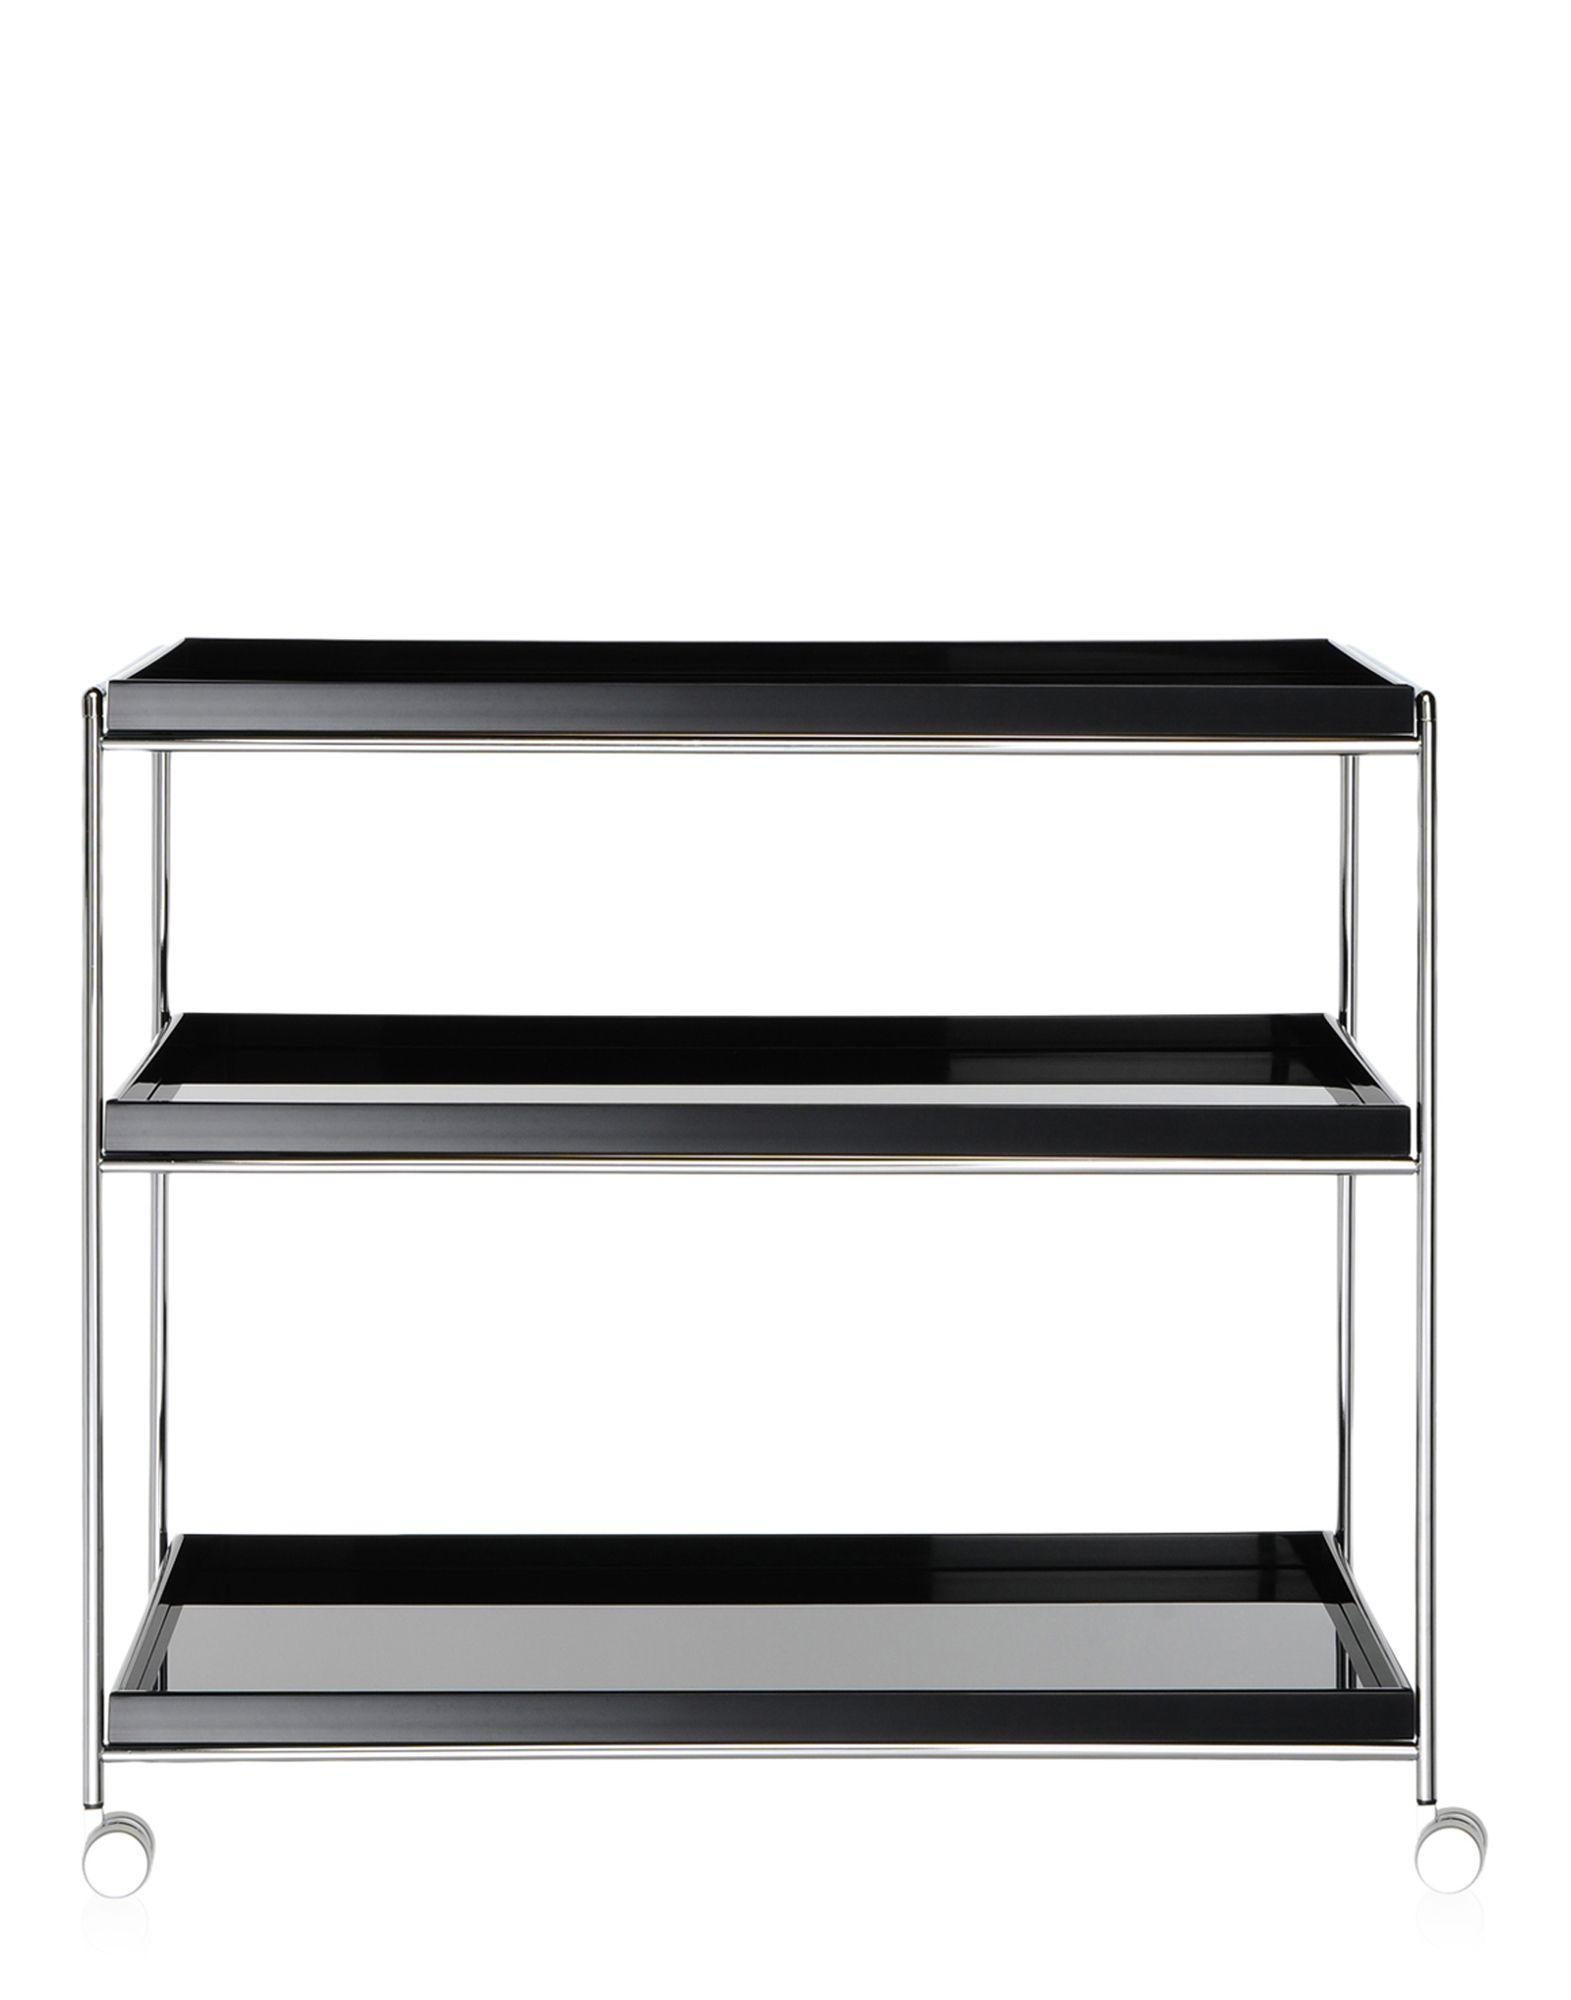 Kartell Multi Rectangular Tray Table by Piero Lissoni In New Condition For Sale In Brooklyn, NY